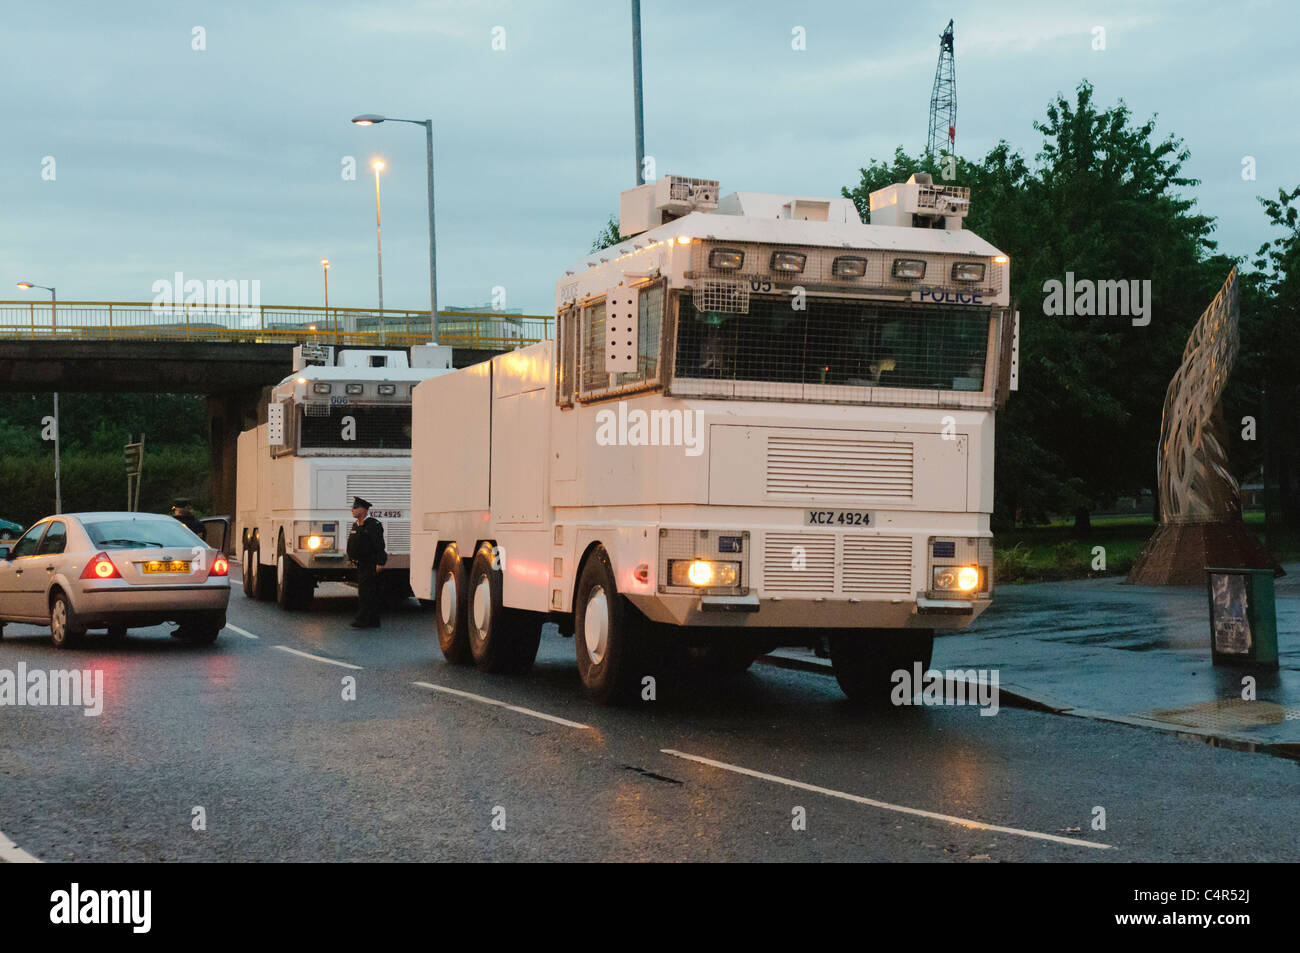 Two PSNI water cannon parked up and waiting to be deployed for crowd control. Stock Photo